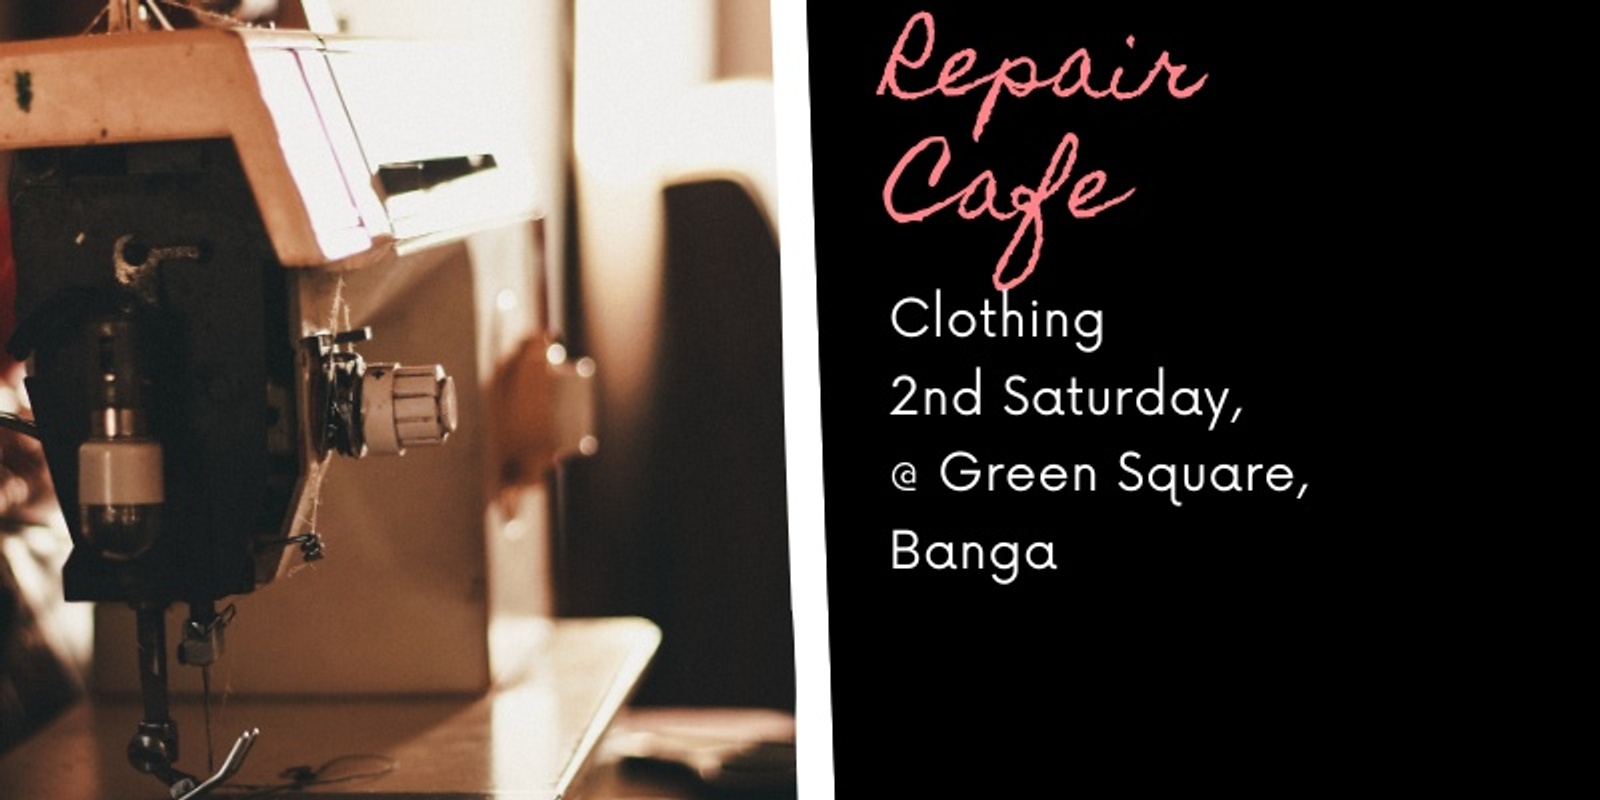 Banner image for Zetland Repair Cafe - Clothing